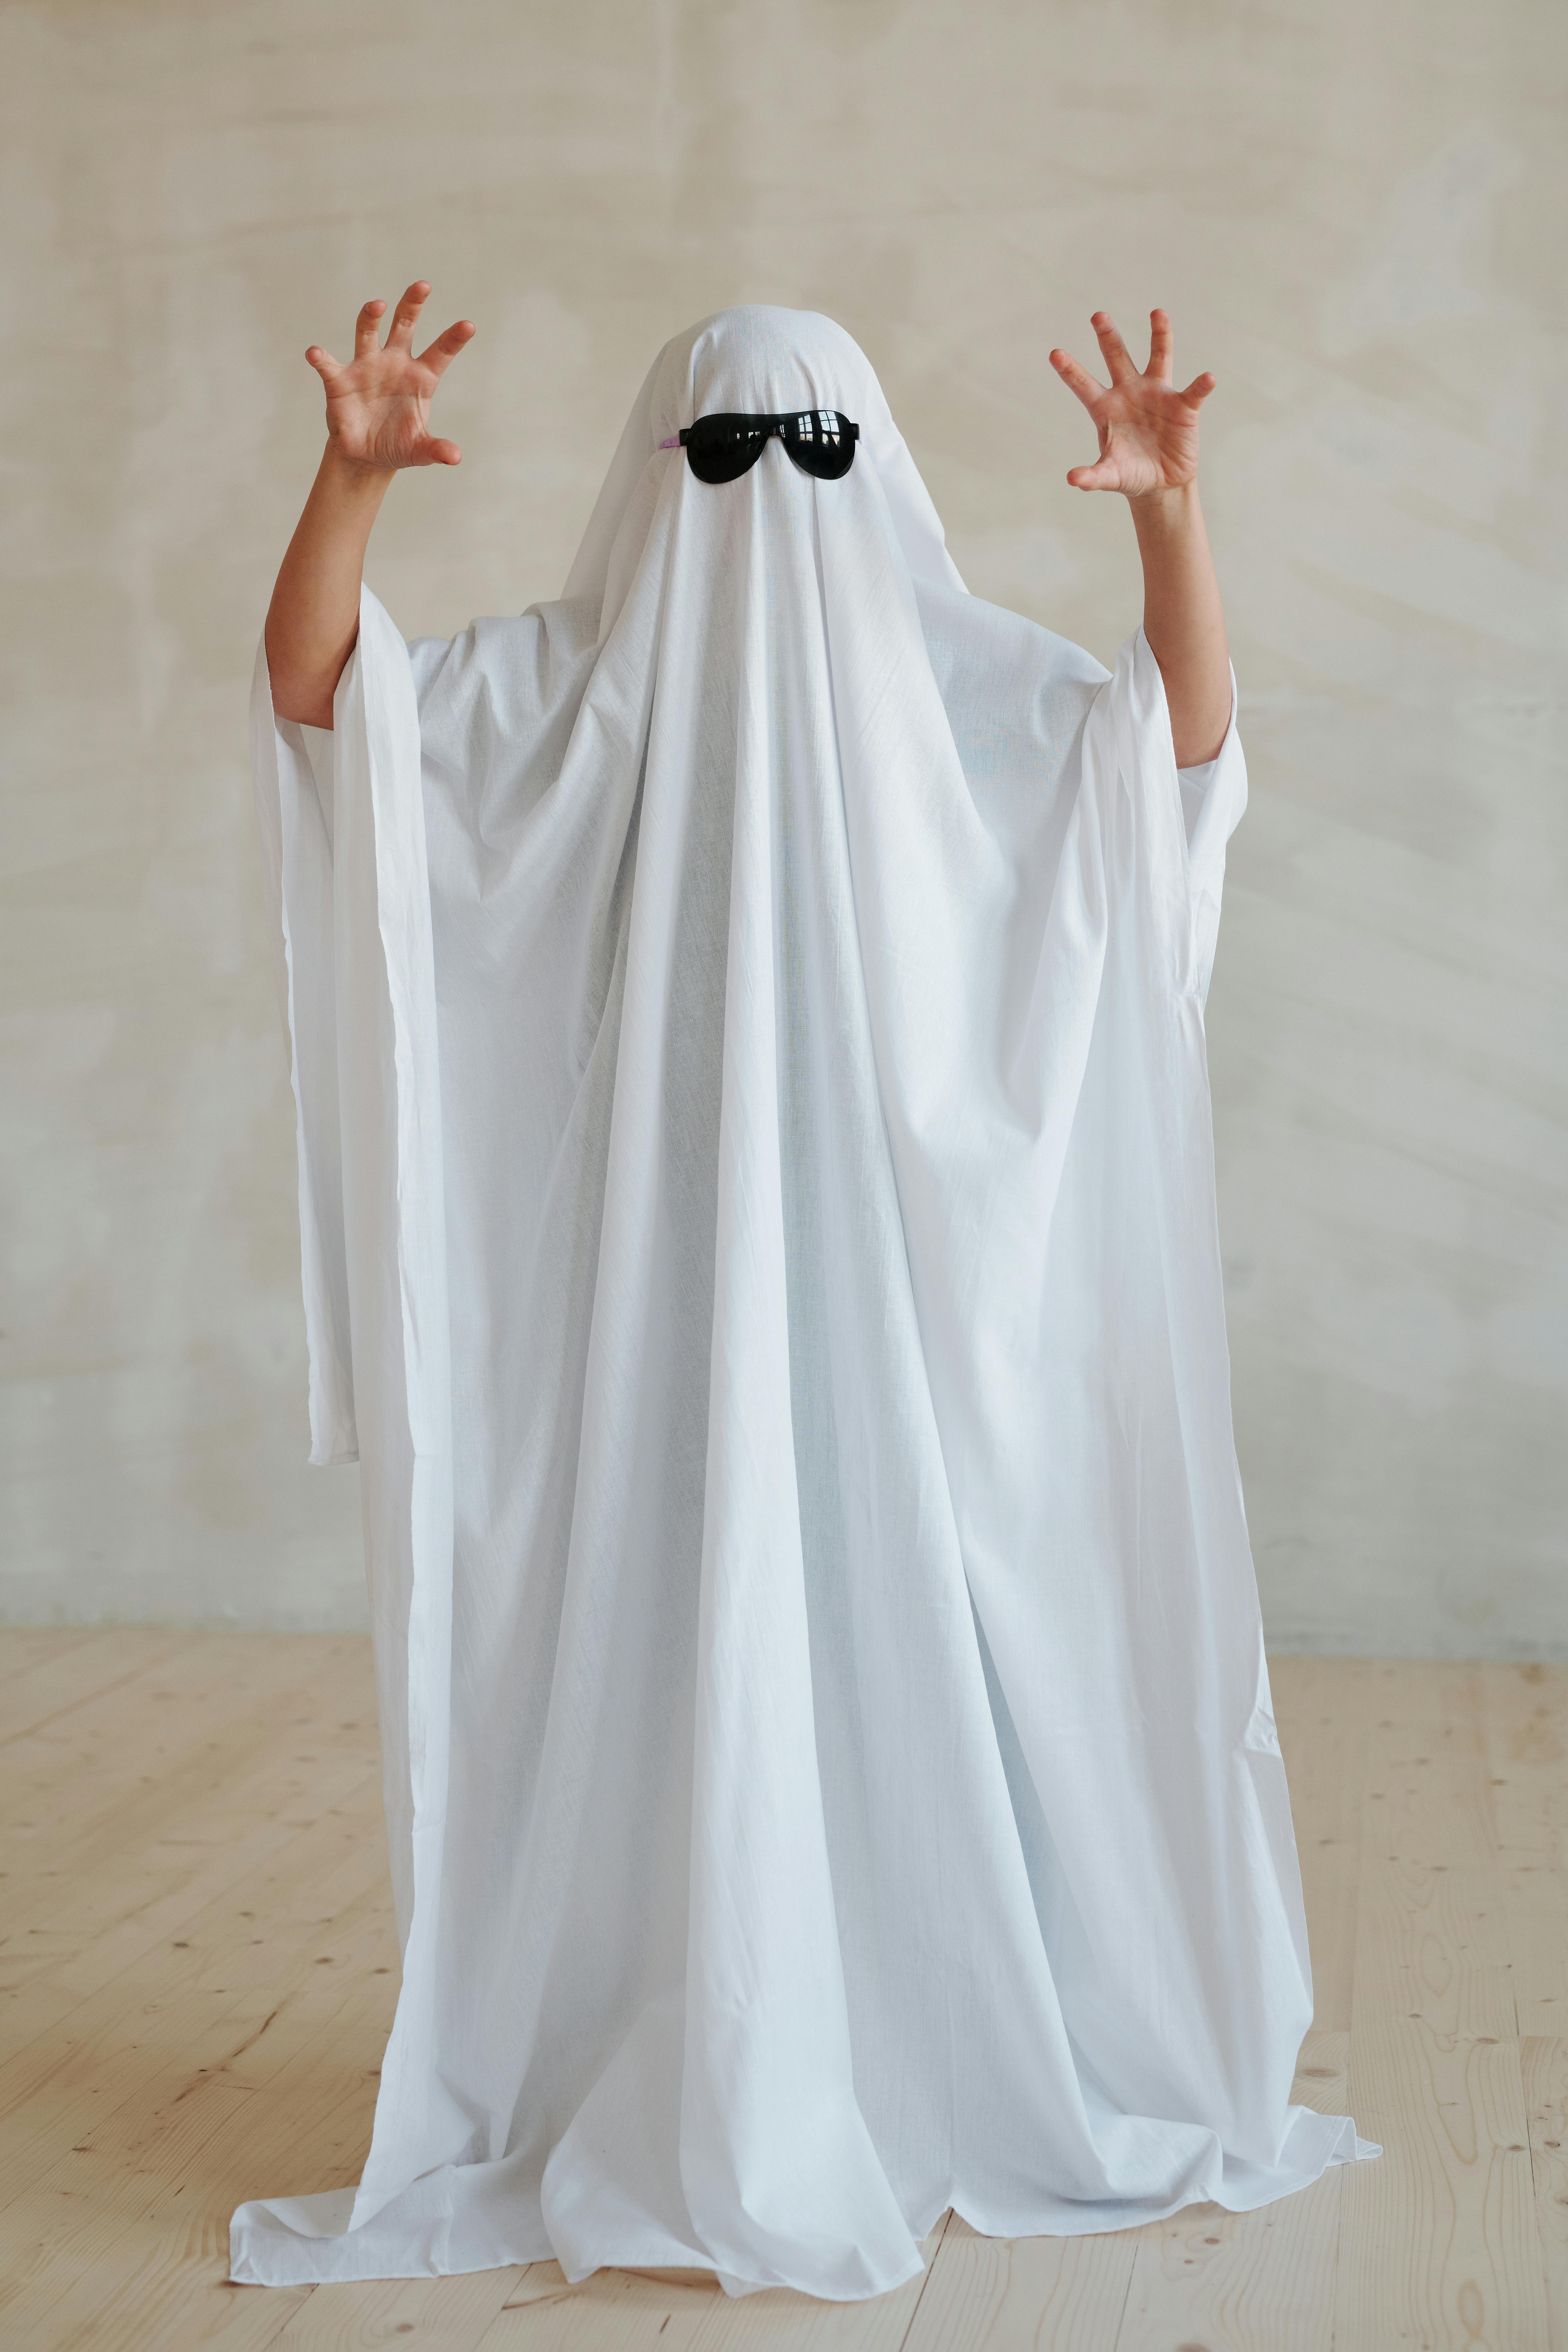 aceptable Delincuente inversión Person Wearing White Halloween Costume and Sunglasses · Free Stock Photo